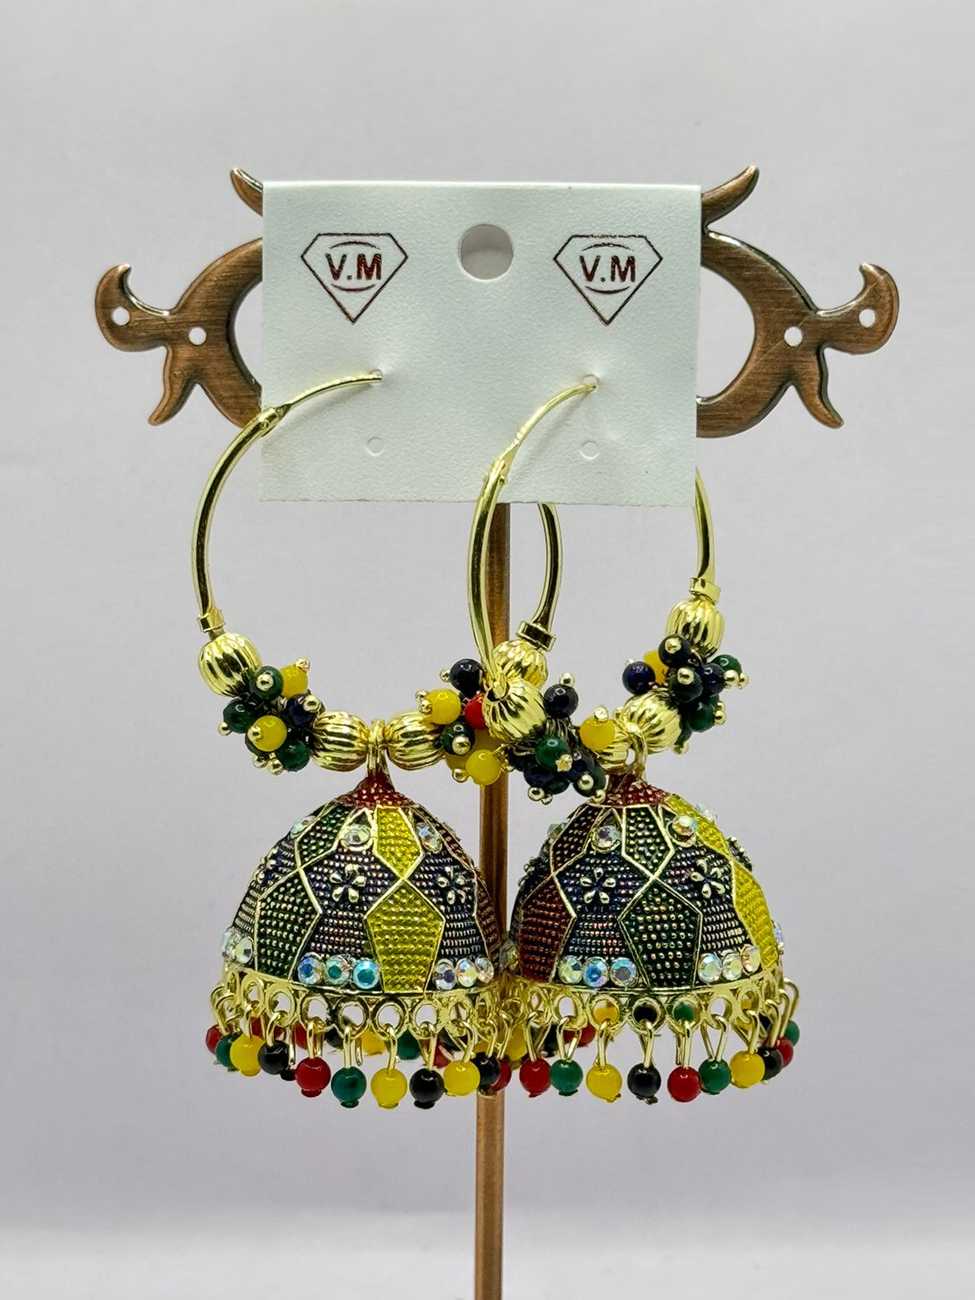 A pair of ornate traditional earrings with intricate metalwork and colorful bead details displayed on a stand with a white background.